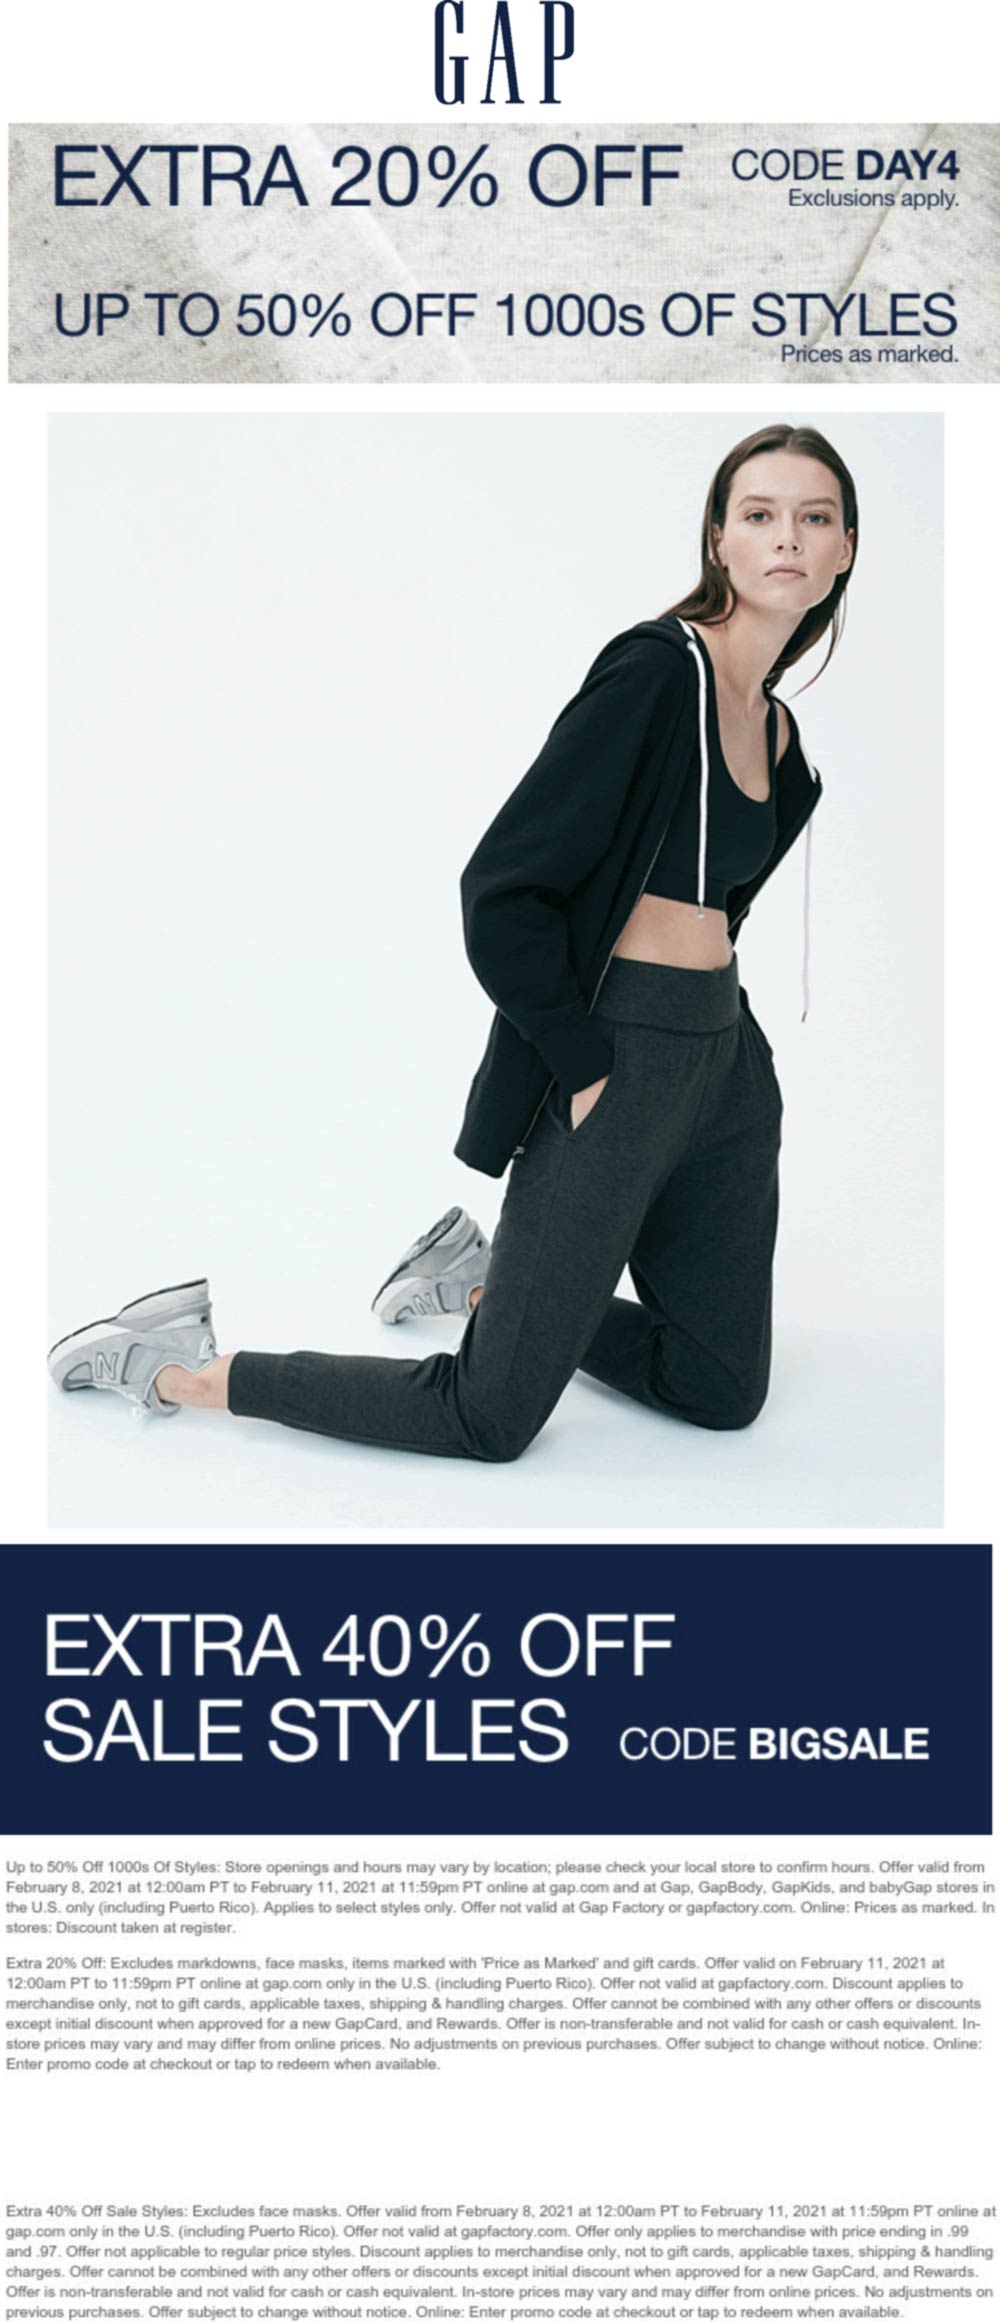 Gap stores Coupon  Extra 40% off sale styles & more today online at Gap via promo codes DAY4 and BIGSALE #gap 